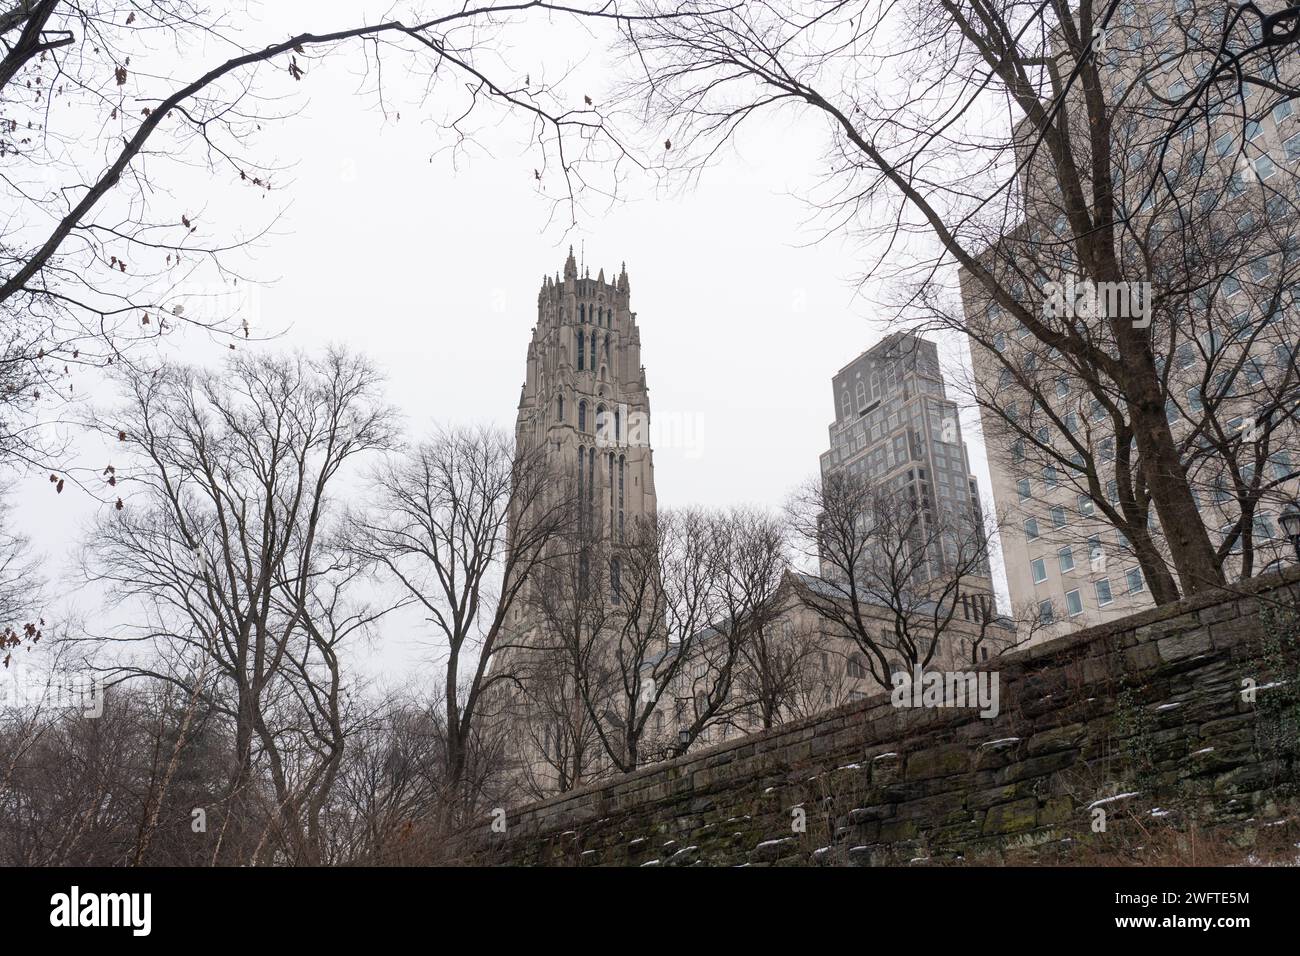 The Riverside Church on the Upper West Side of New York City. Photo date: Tuesday, January 23, 2024. Photo: Richard Gray/Alamy Stock Photo